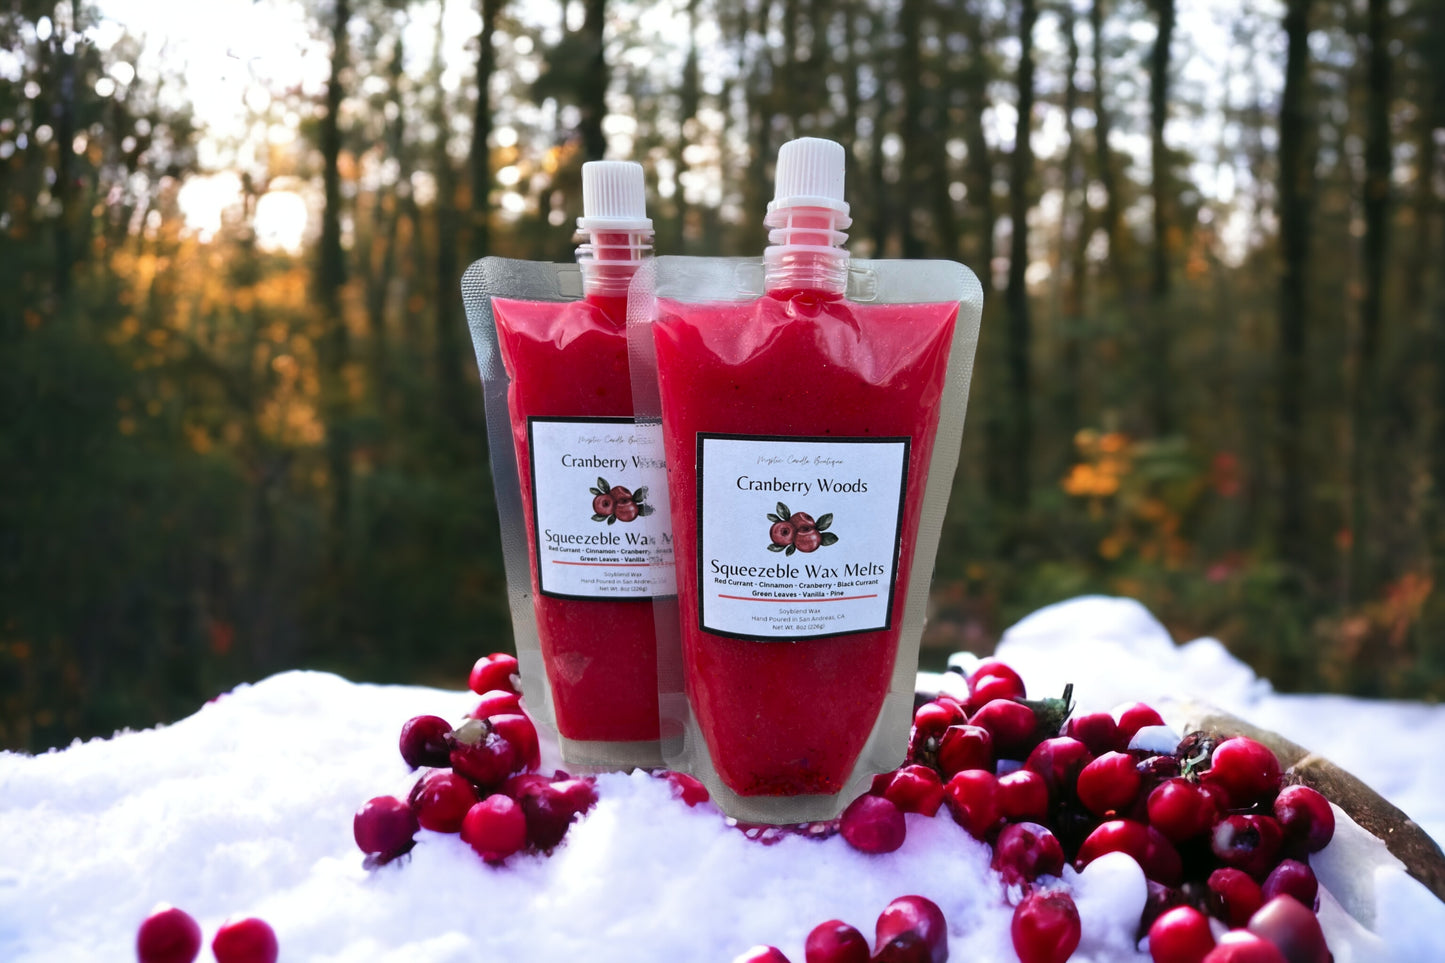 Cranberry woods squeezable wax